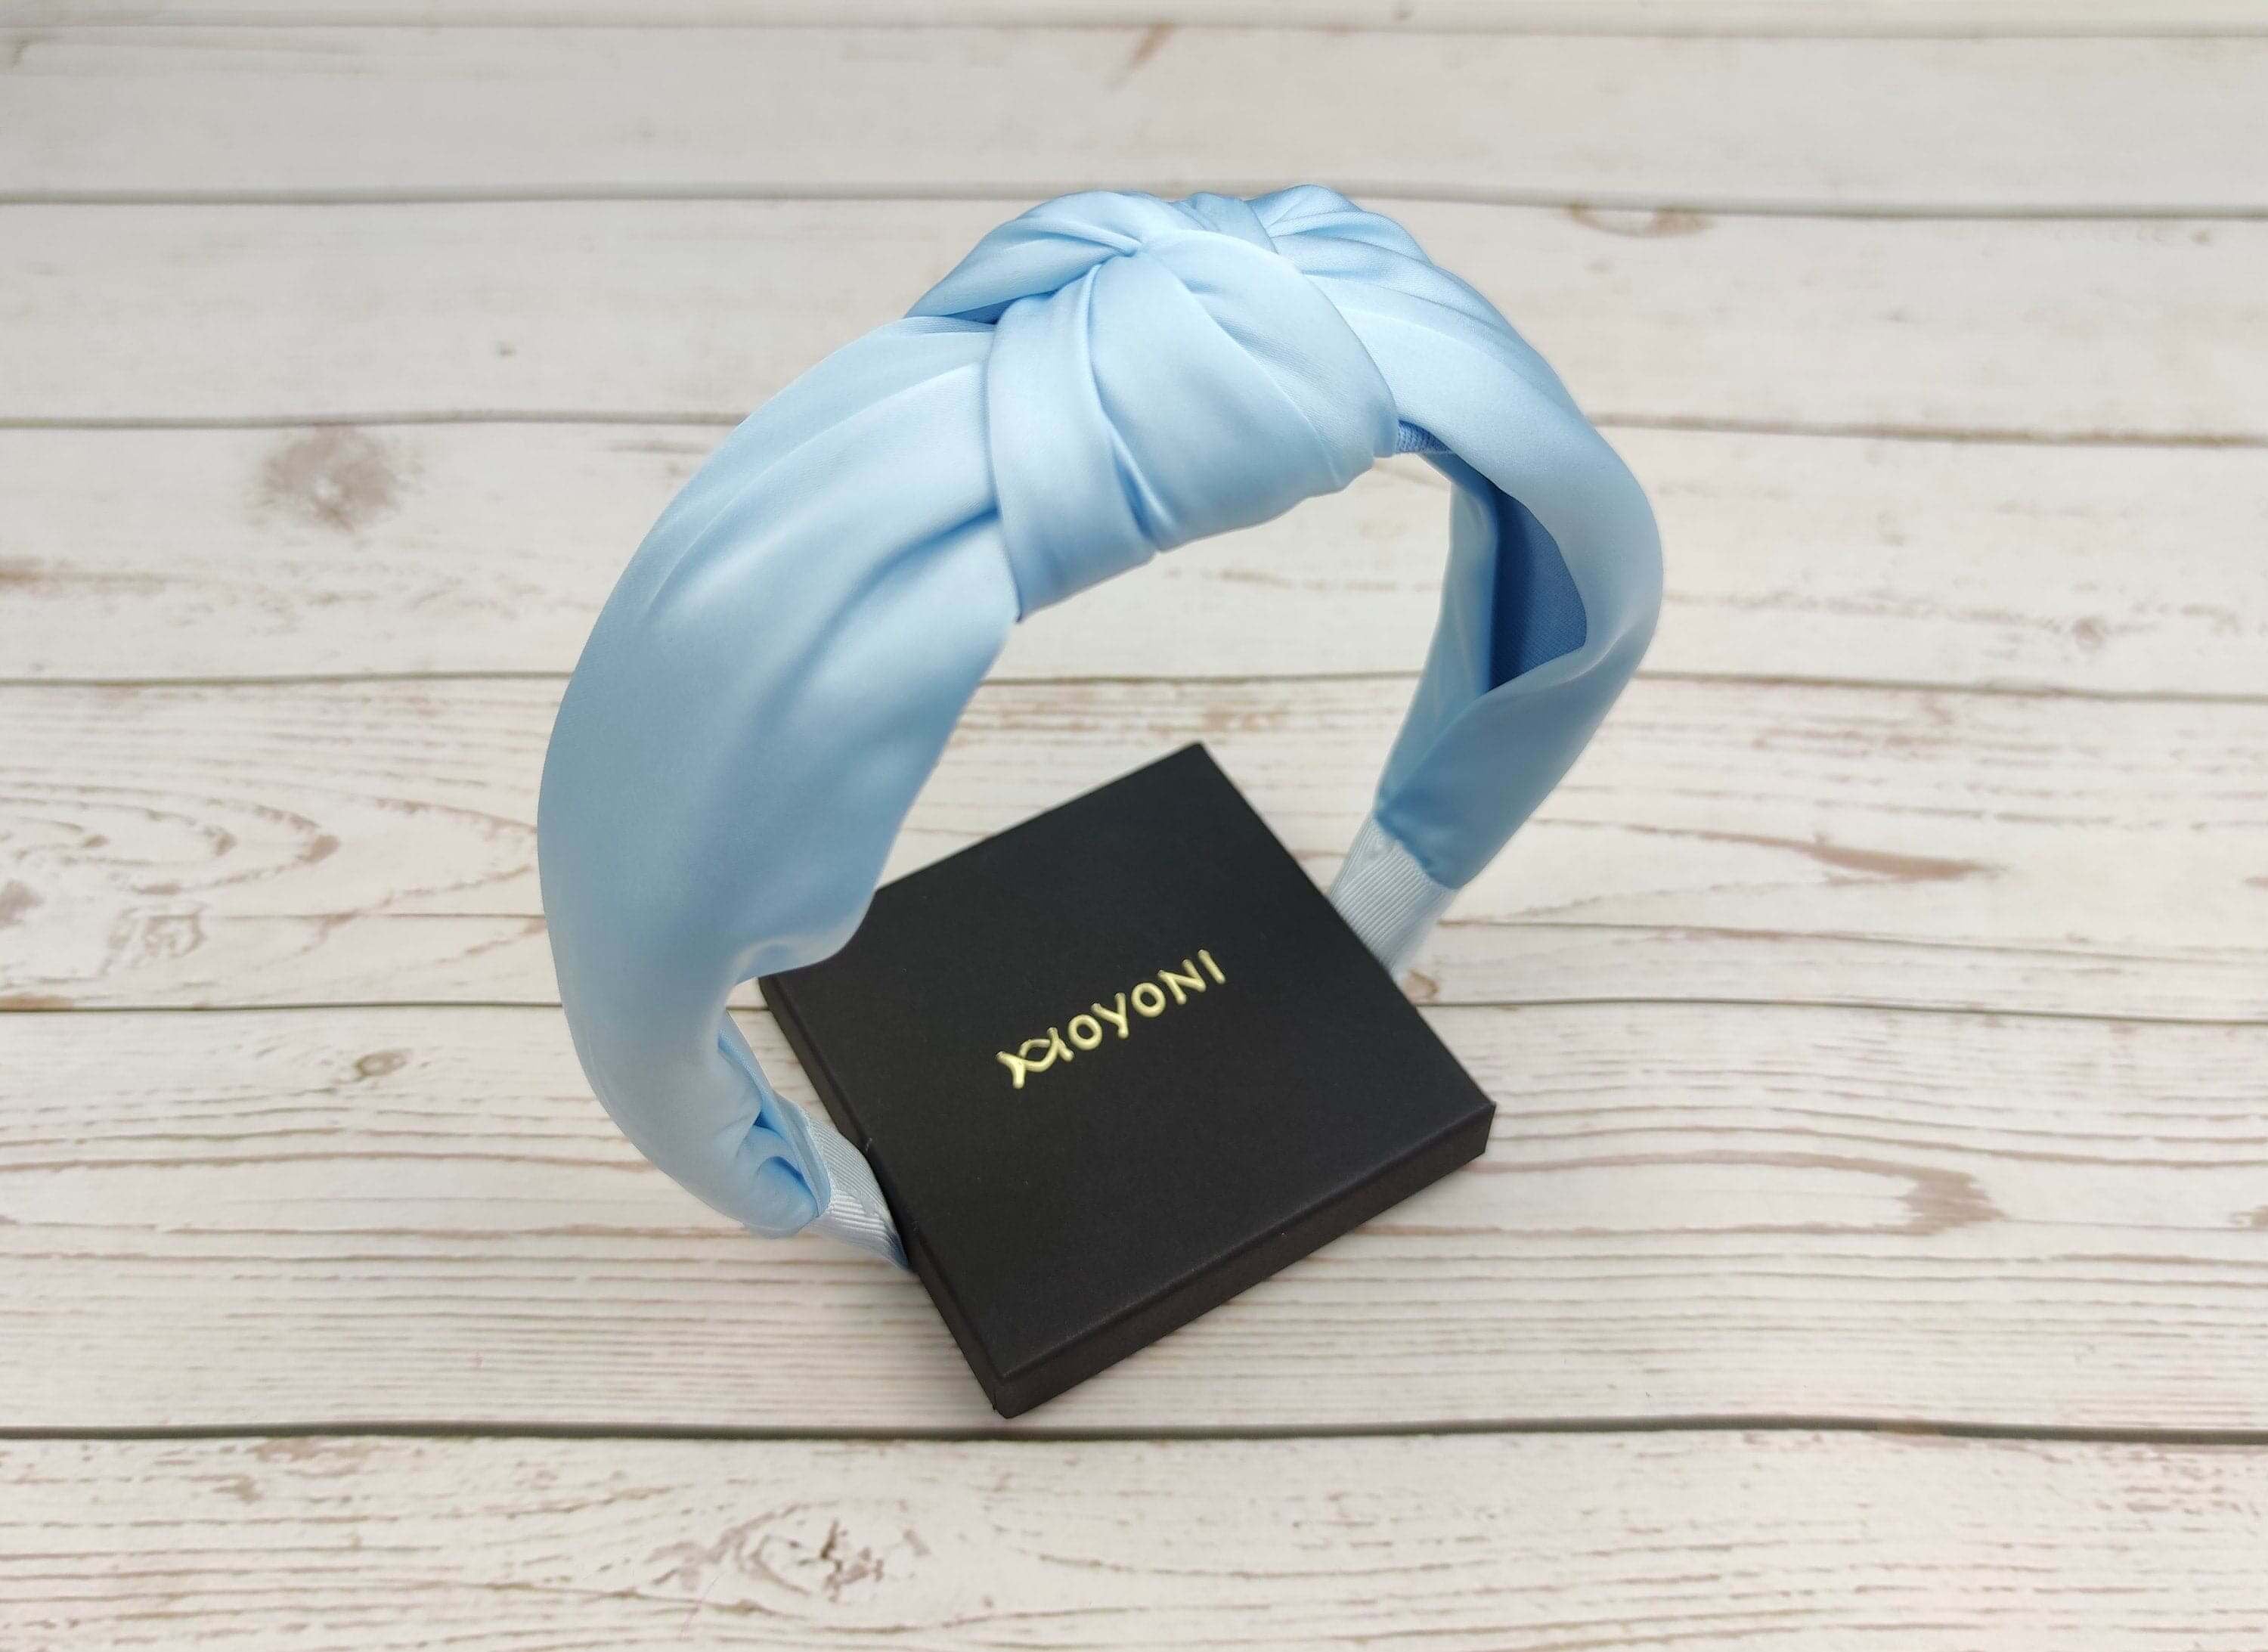 Find the perfect headband for your outfit with our selection of stylish and colorful headbands. Made from soft and comfortable fabric, these blue headbands will keep your hair in place all day long.